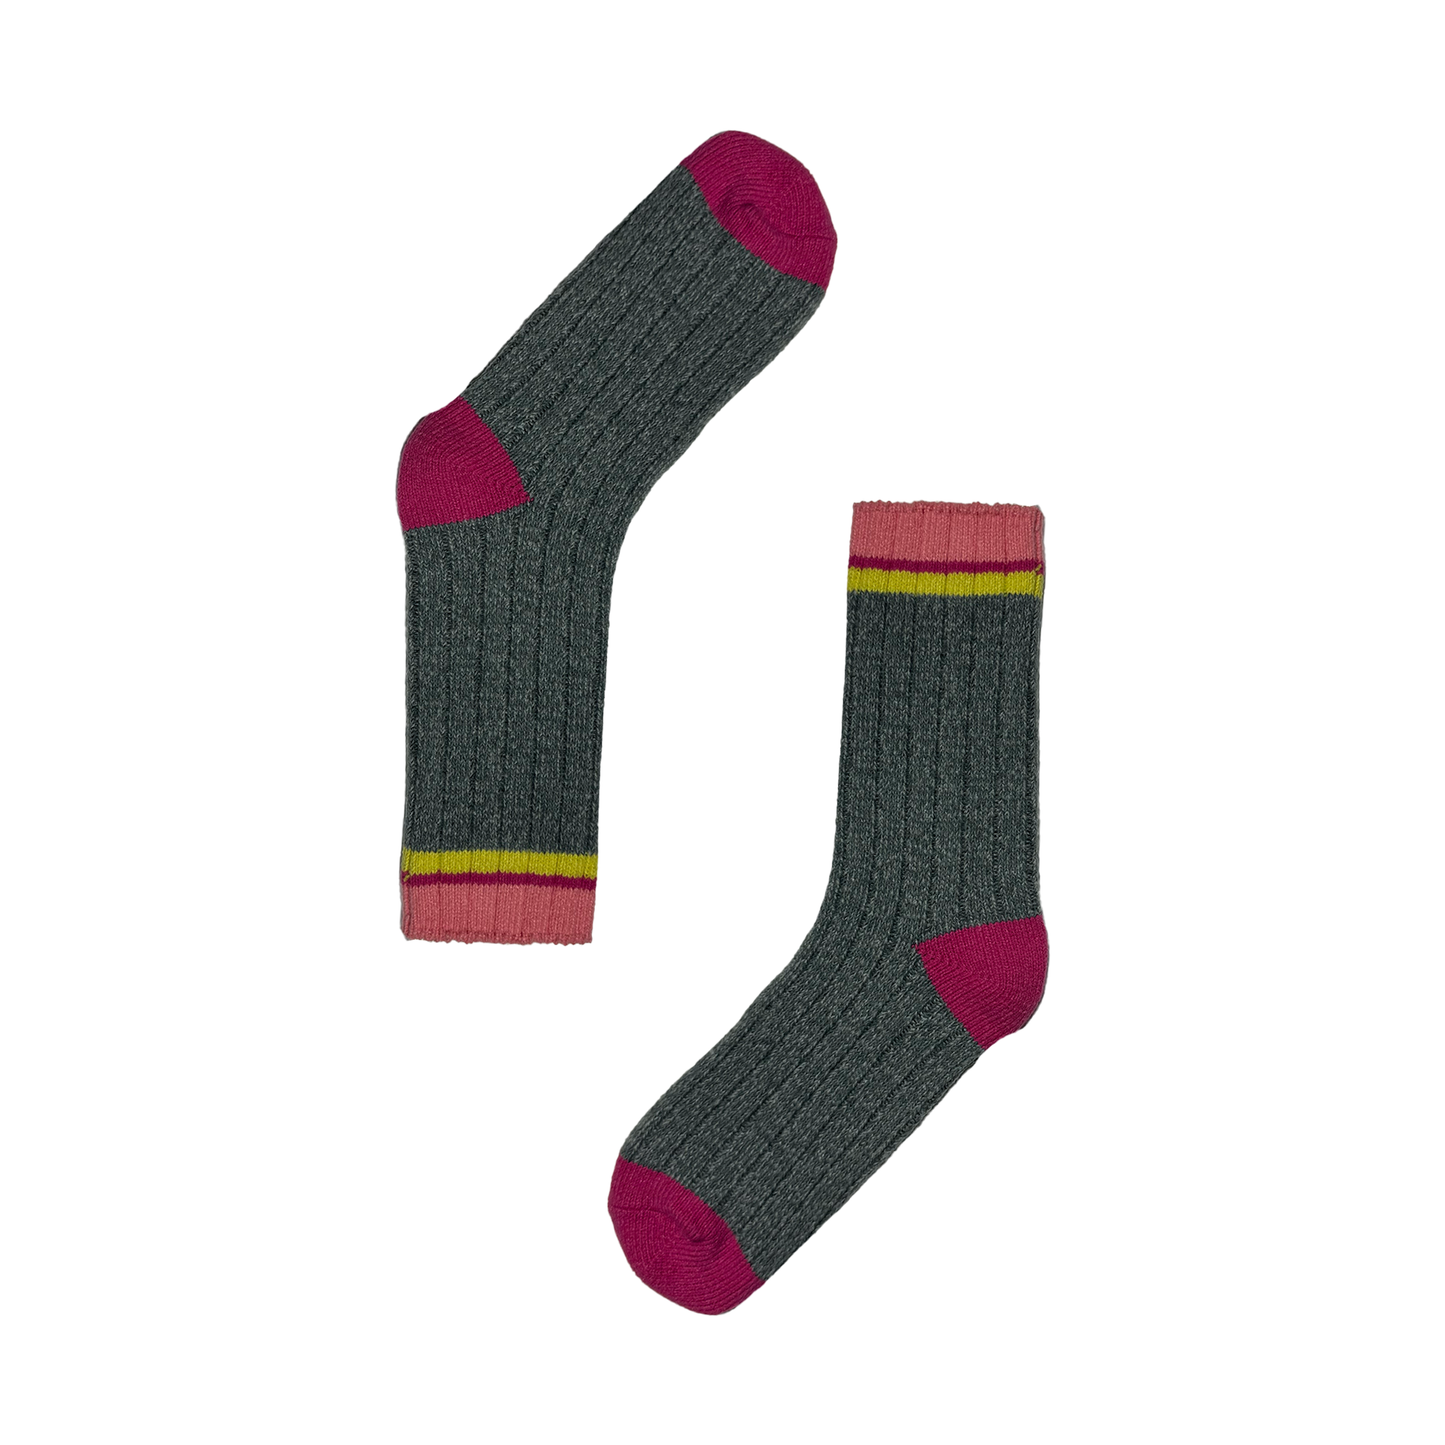 Ladies Super Soft Sock - The Florence